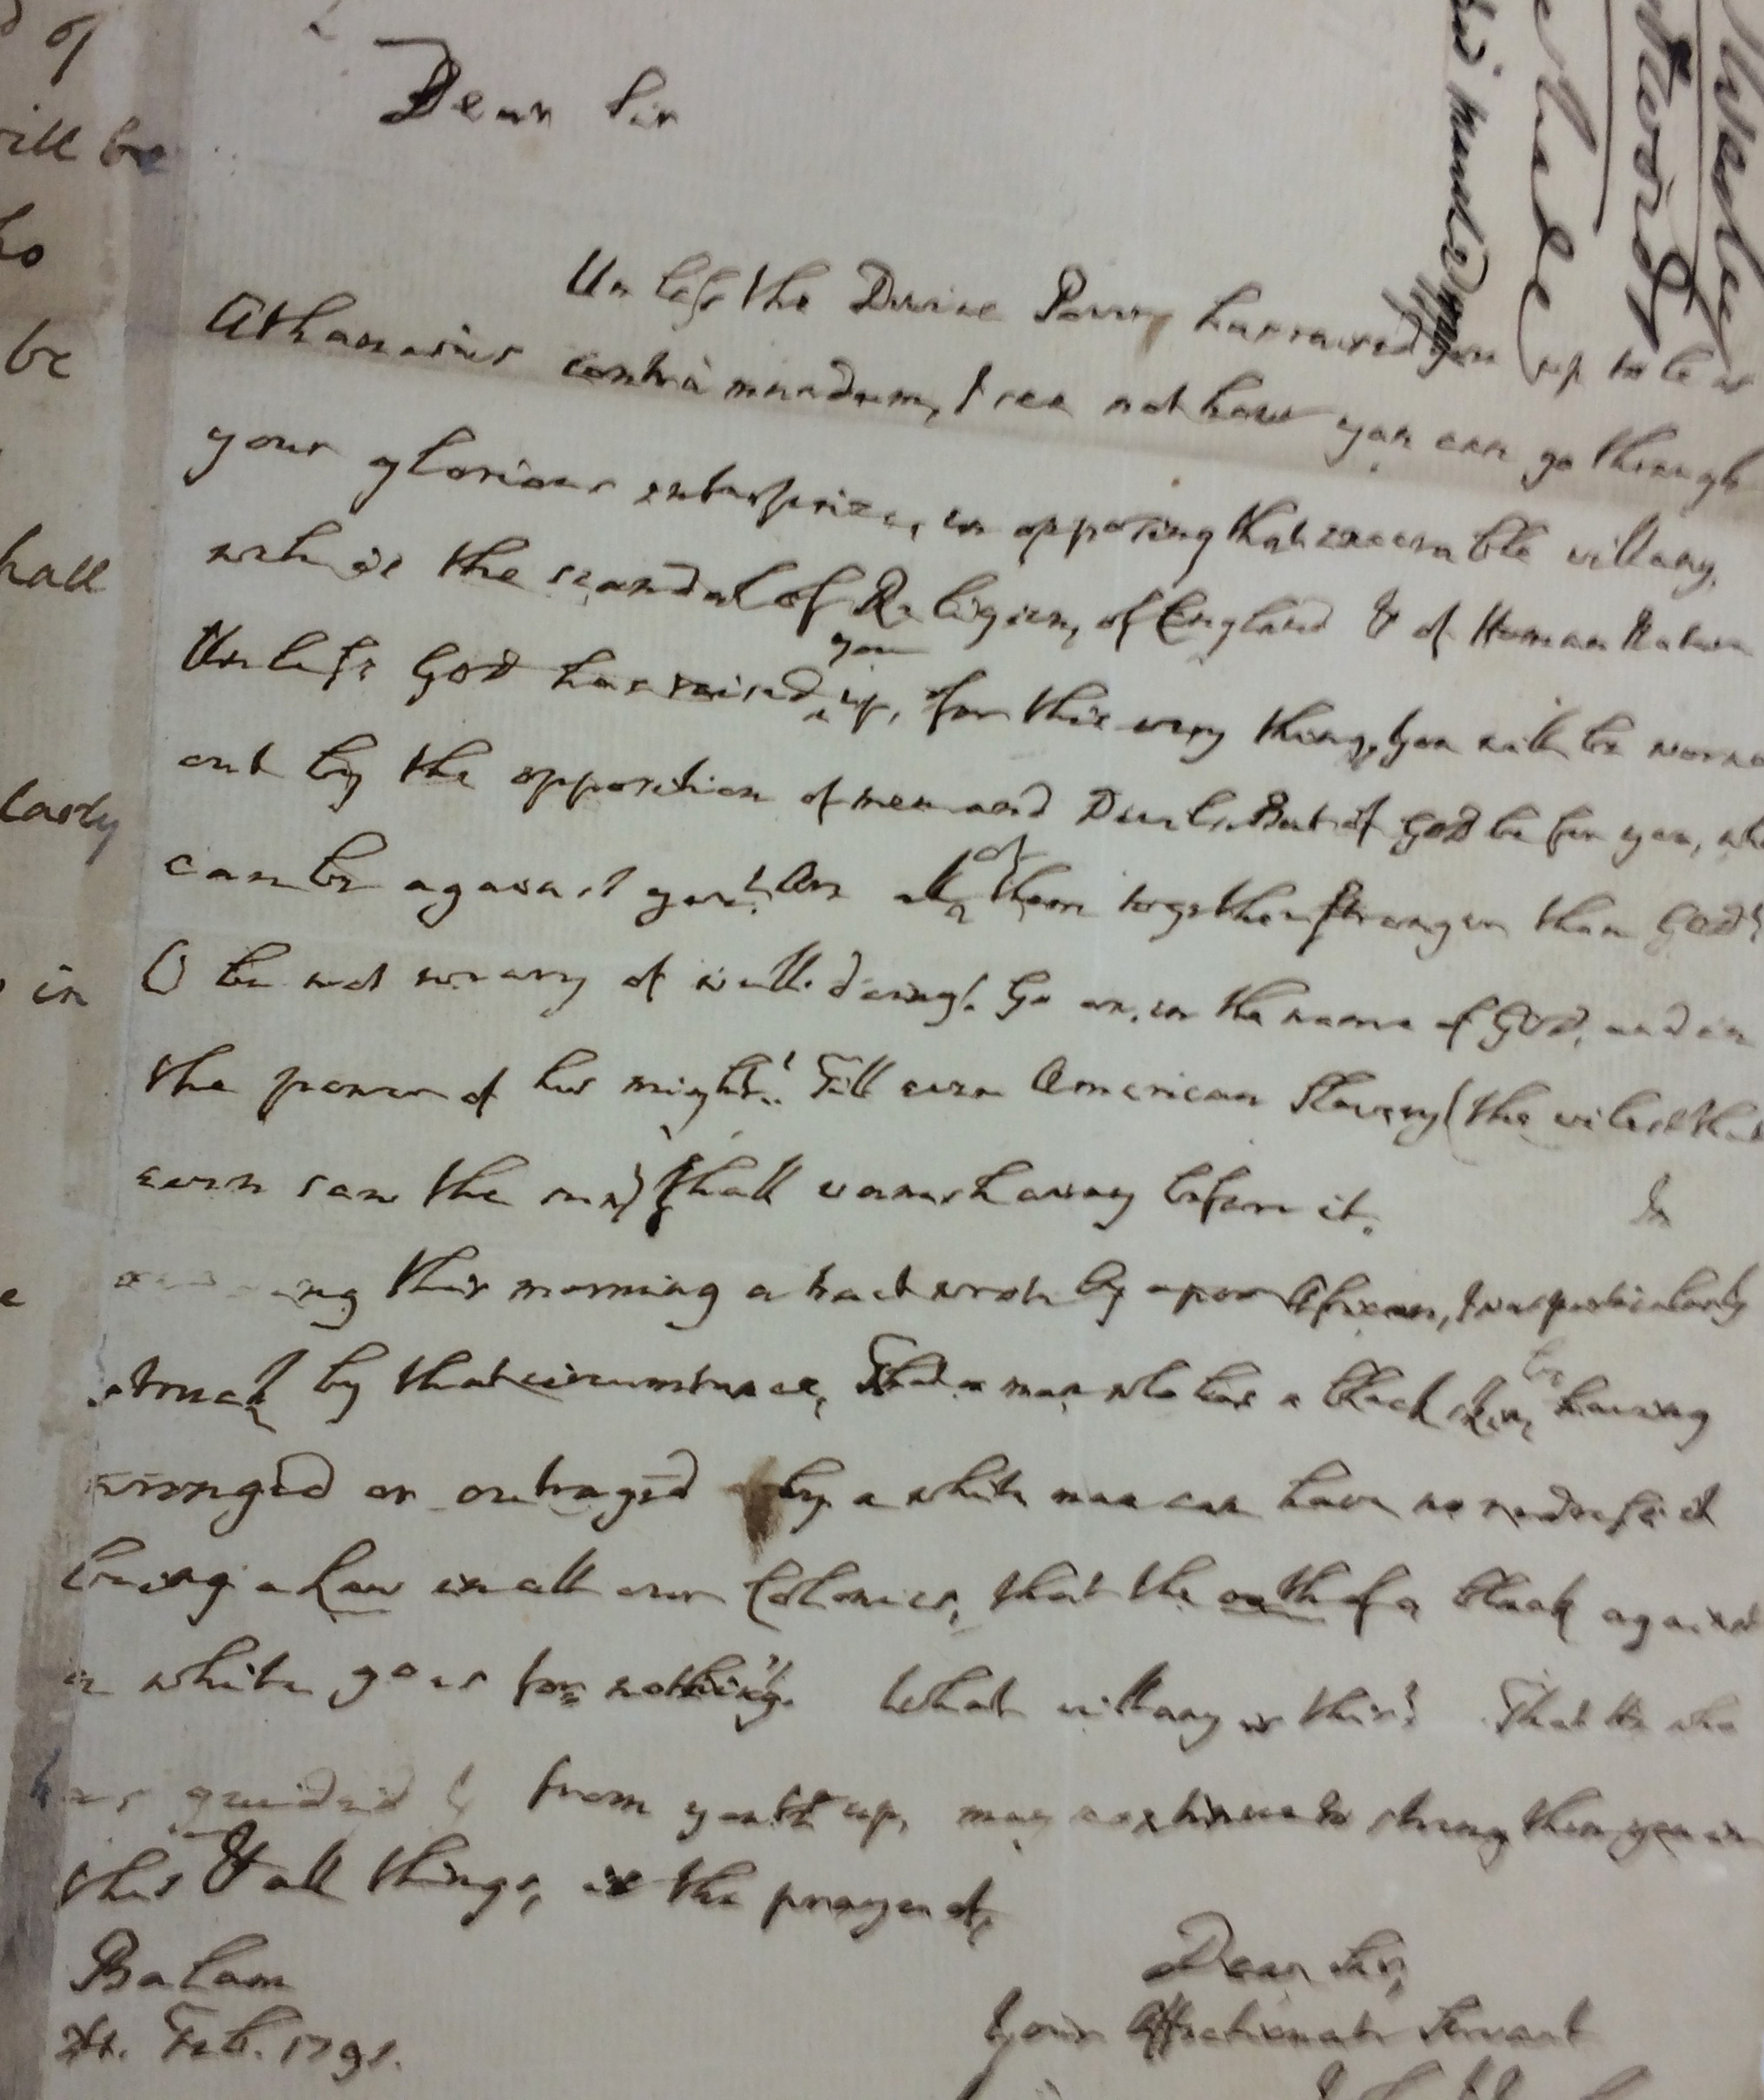 The United Methodist Commission on Archives and History shares its vaults with Drew University, which has John Wesley’s last letter as part of its collection. Photo by Fran Walsh, United Methodist Communications